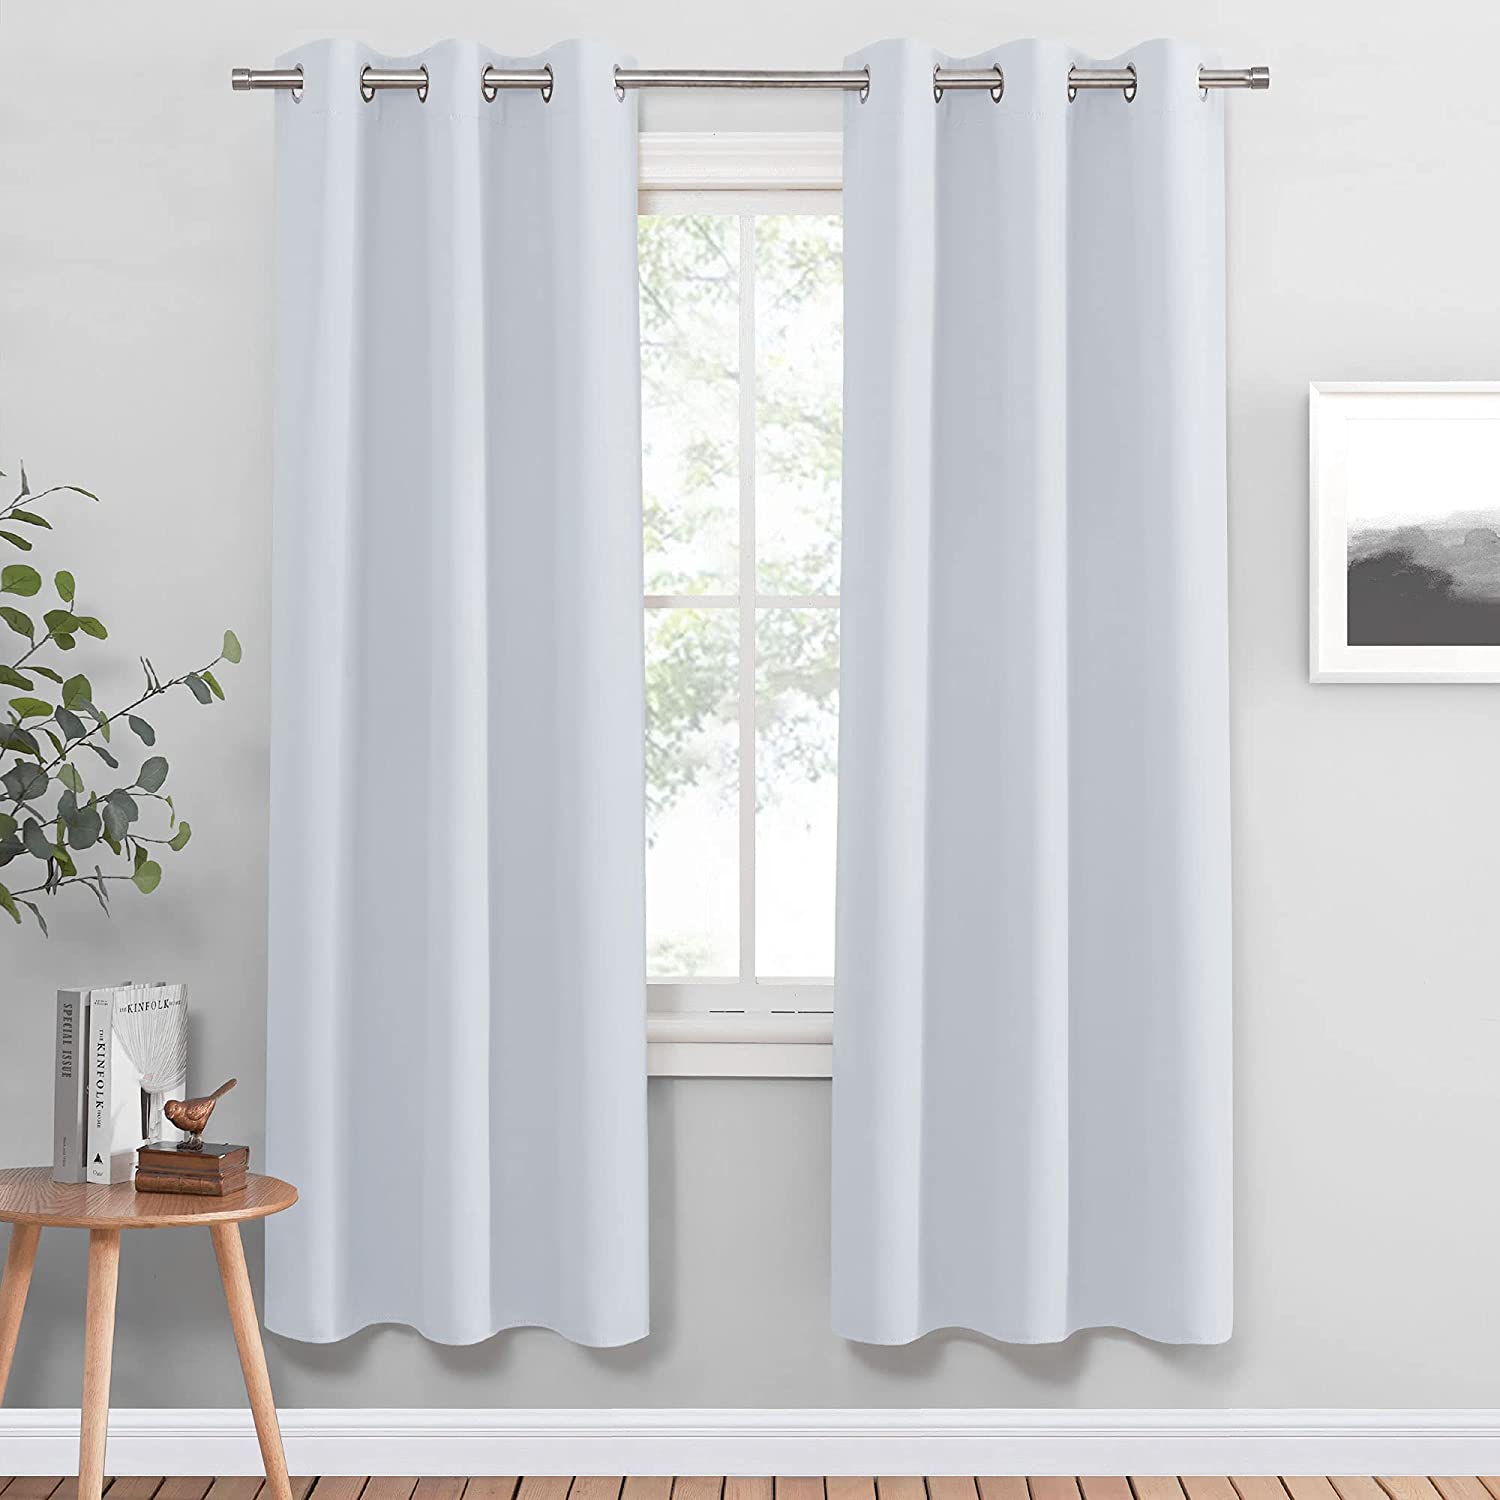 Grommet Thermal Insulated Blackout Weave Curtains For Living Room 2 Panels KGORGE Store